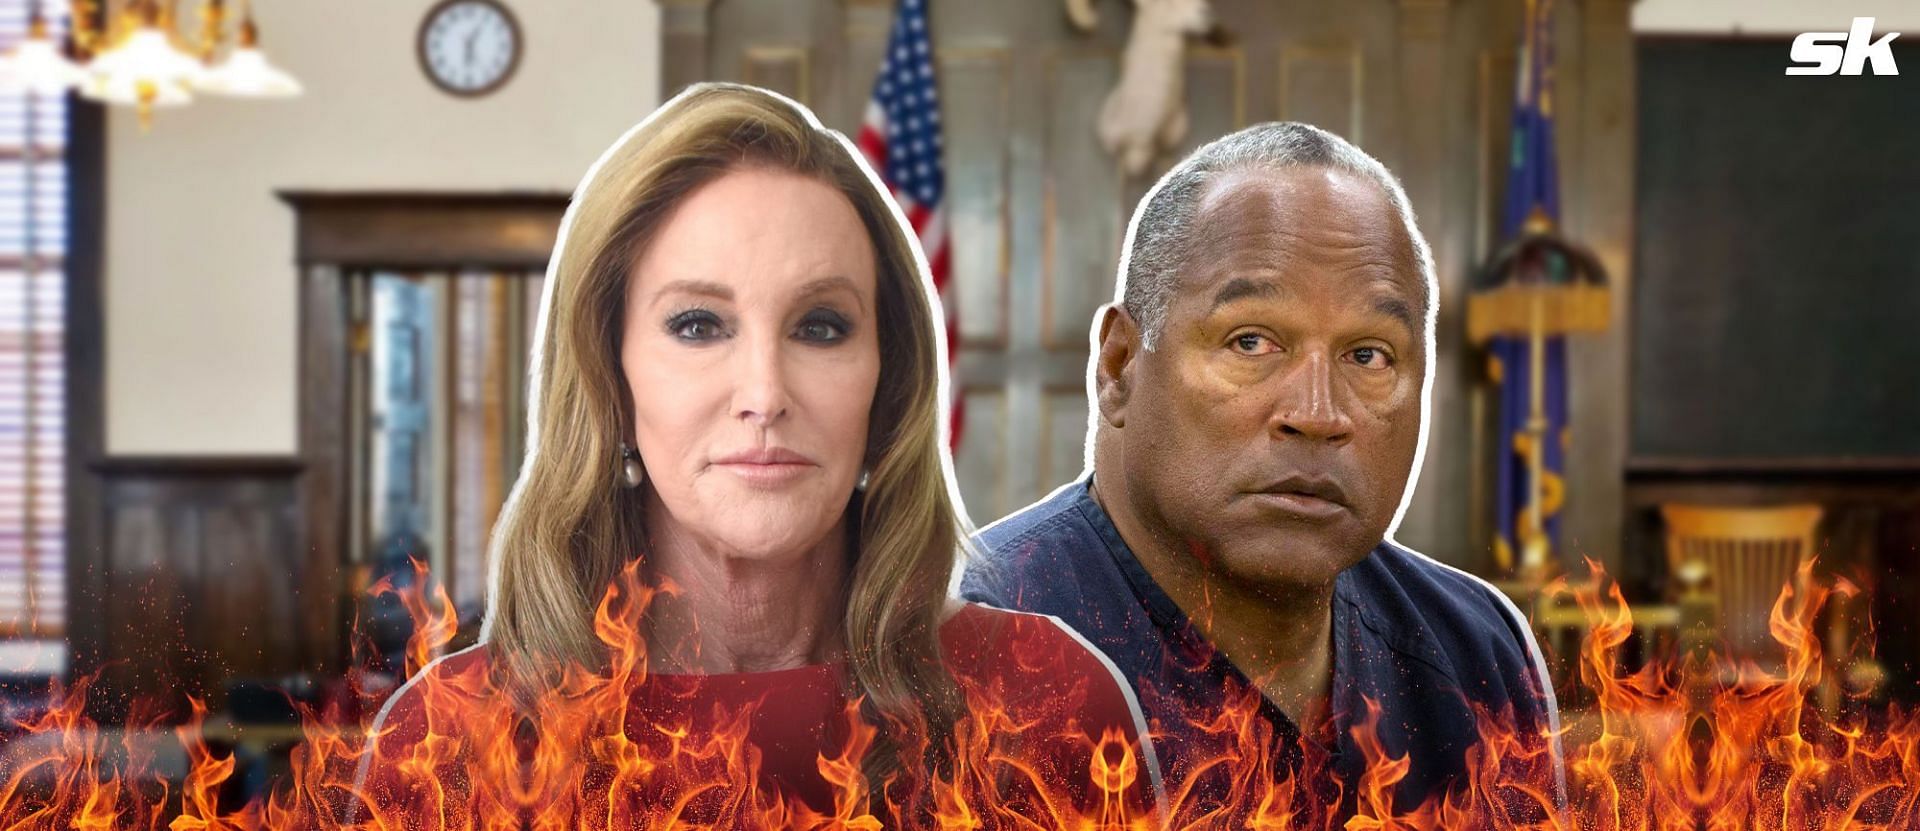 Fans pounce on Caitlyn Jenner bidding good riddance to O.J. Simpson